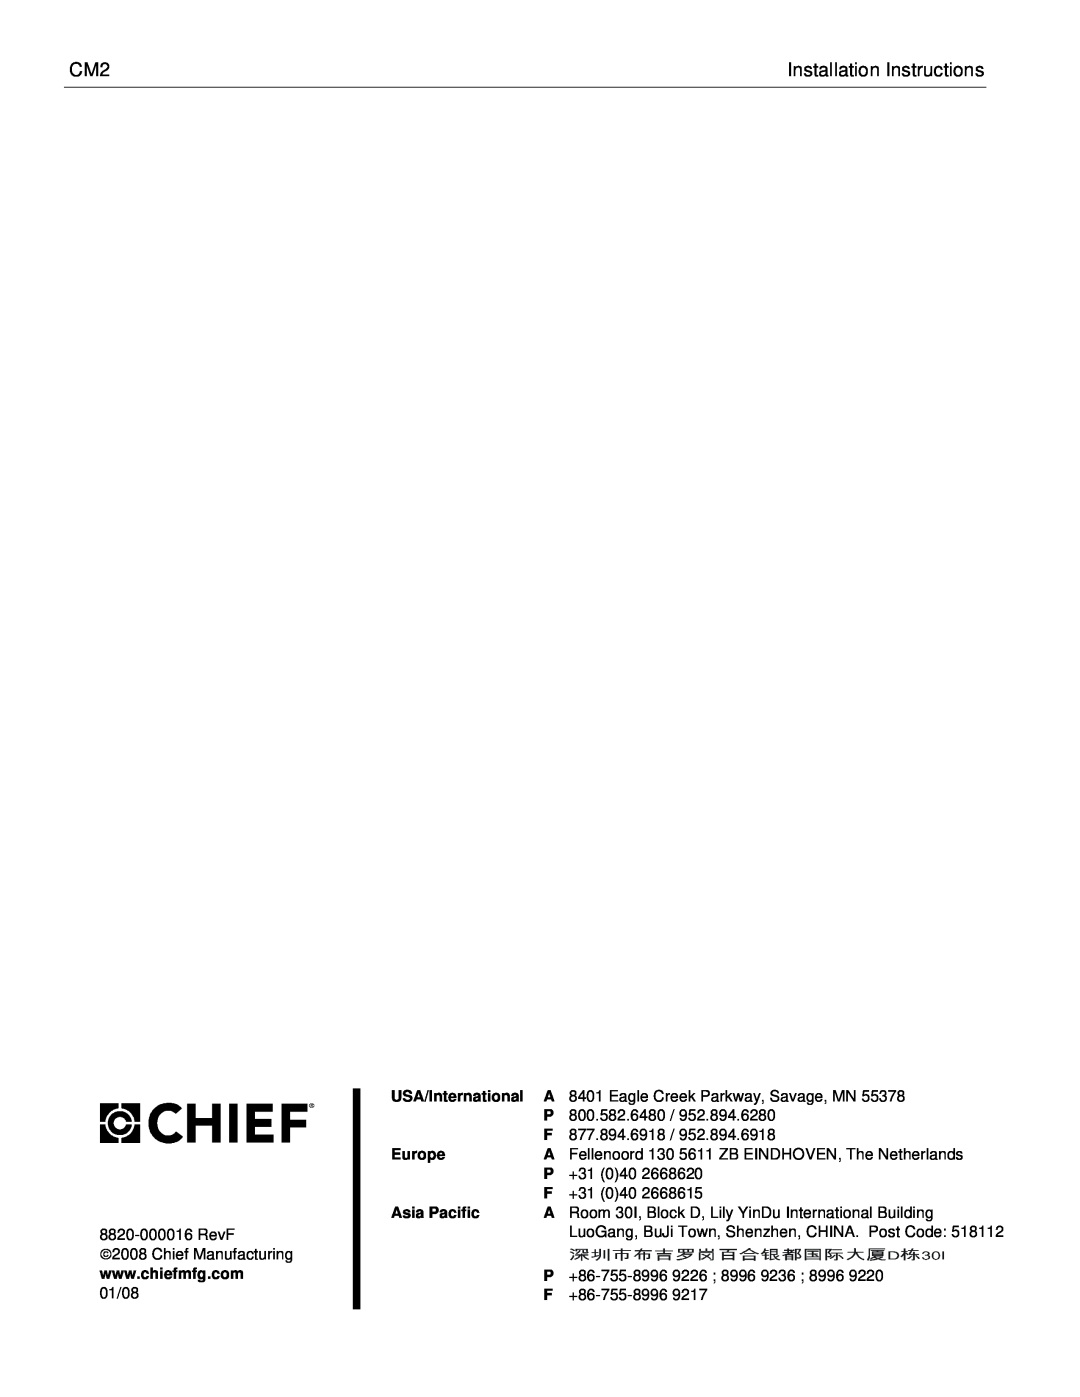 Chief Manufacturing CM2 Installation Instructions, USA/International, Eagle Creek Parkway, Savage, MN, 800.582.6480, +31 